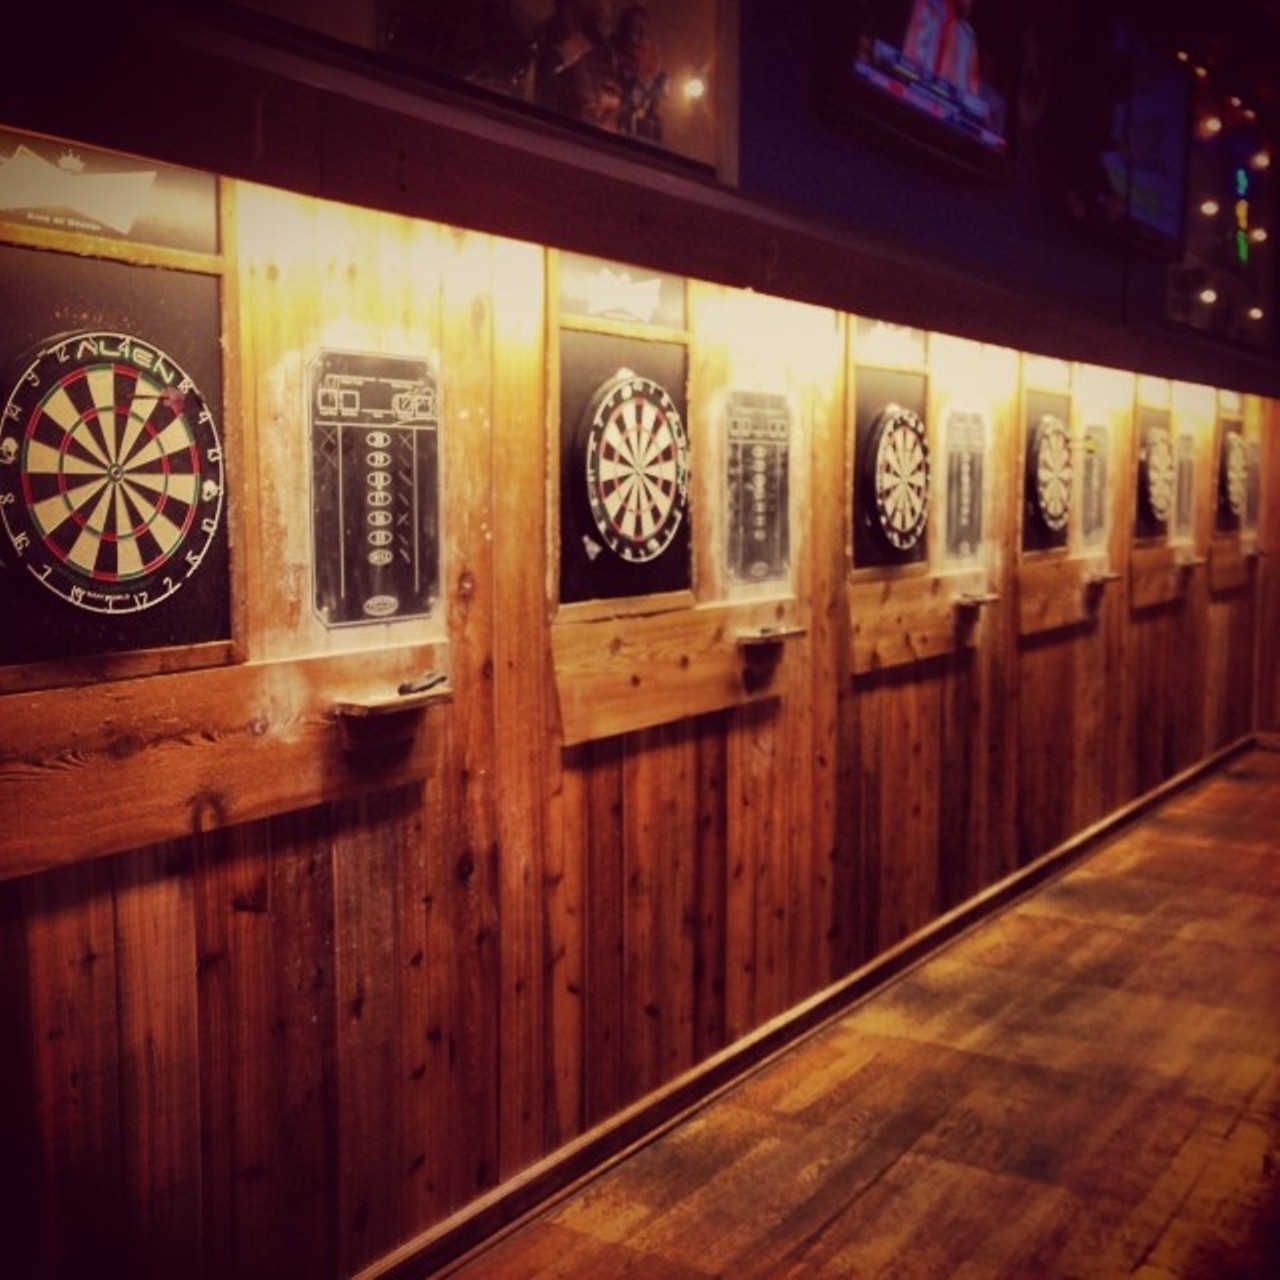 If your mom is competitive, take her to the Blueberry Hill open dart tournament.
6504 Delmar Blvd. 
St. Louis, MO 63130
(314) 727-4444
The greatest sport in the indoor league is a favorite of moms who enjoy a beer and a smoke -- that's why Blueberry Hill's smoking area is attached to the darts room. Mother's Day is the championship day in the nation's longest running tourney, which takes place all weekend. Let Mom show off her skill, or just come to watch and grab a drink. It's a win either way. Photo courtesy of Flickr / Frank Reedy.